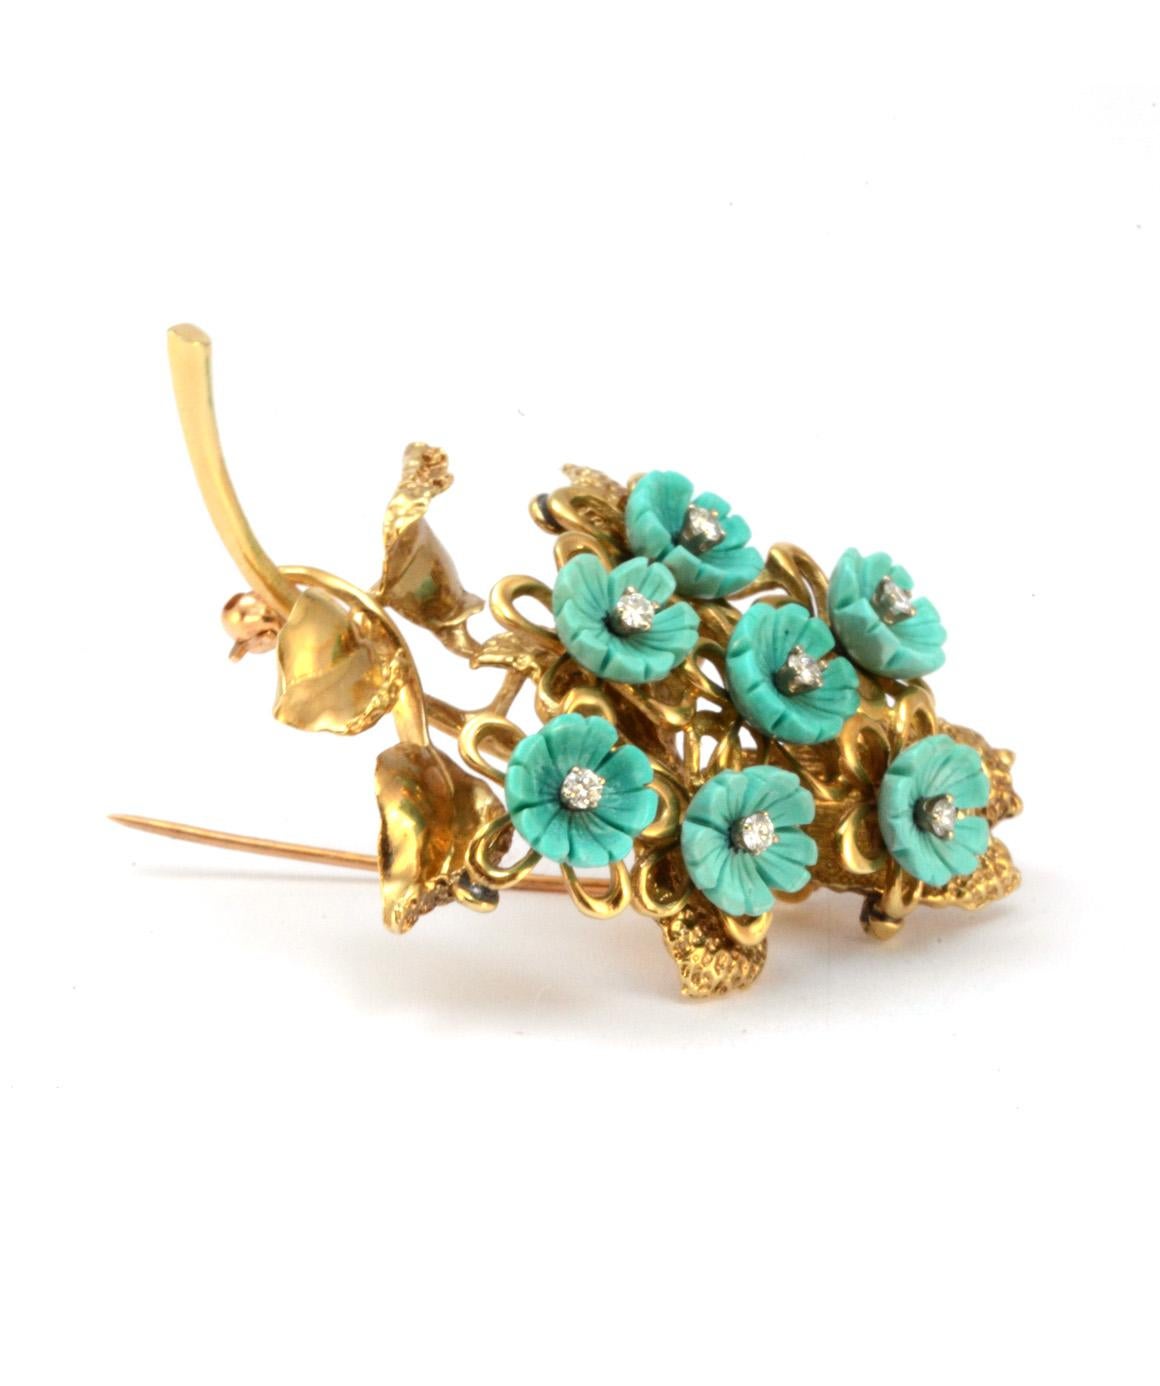 Solid 14K Yellow Gold Natural Diamond and Turquoise Brooch Excellent Condition! This beautiful leaf pin has 7 turquoise flowers with 7 diamonds, approximately .105cttw. This brooch is about 2.25 inches  by 1 inch, and weighs about 13.7 grams. Please